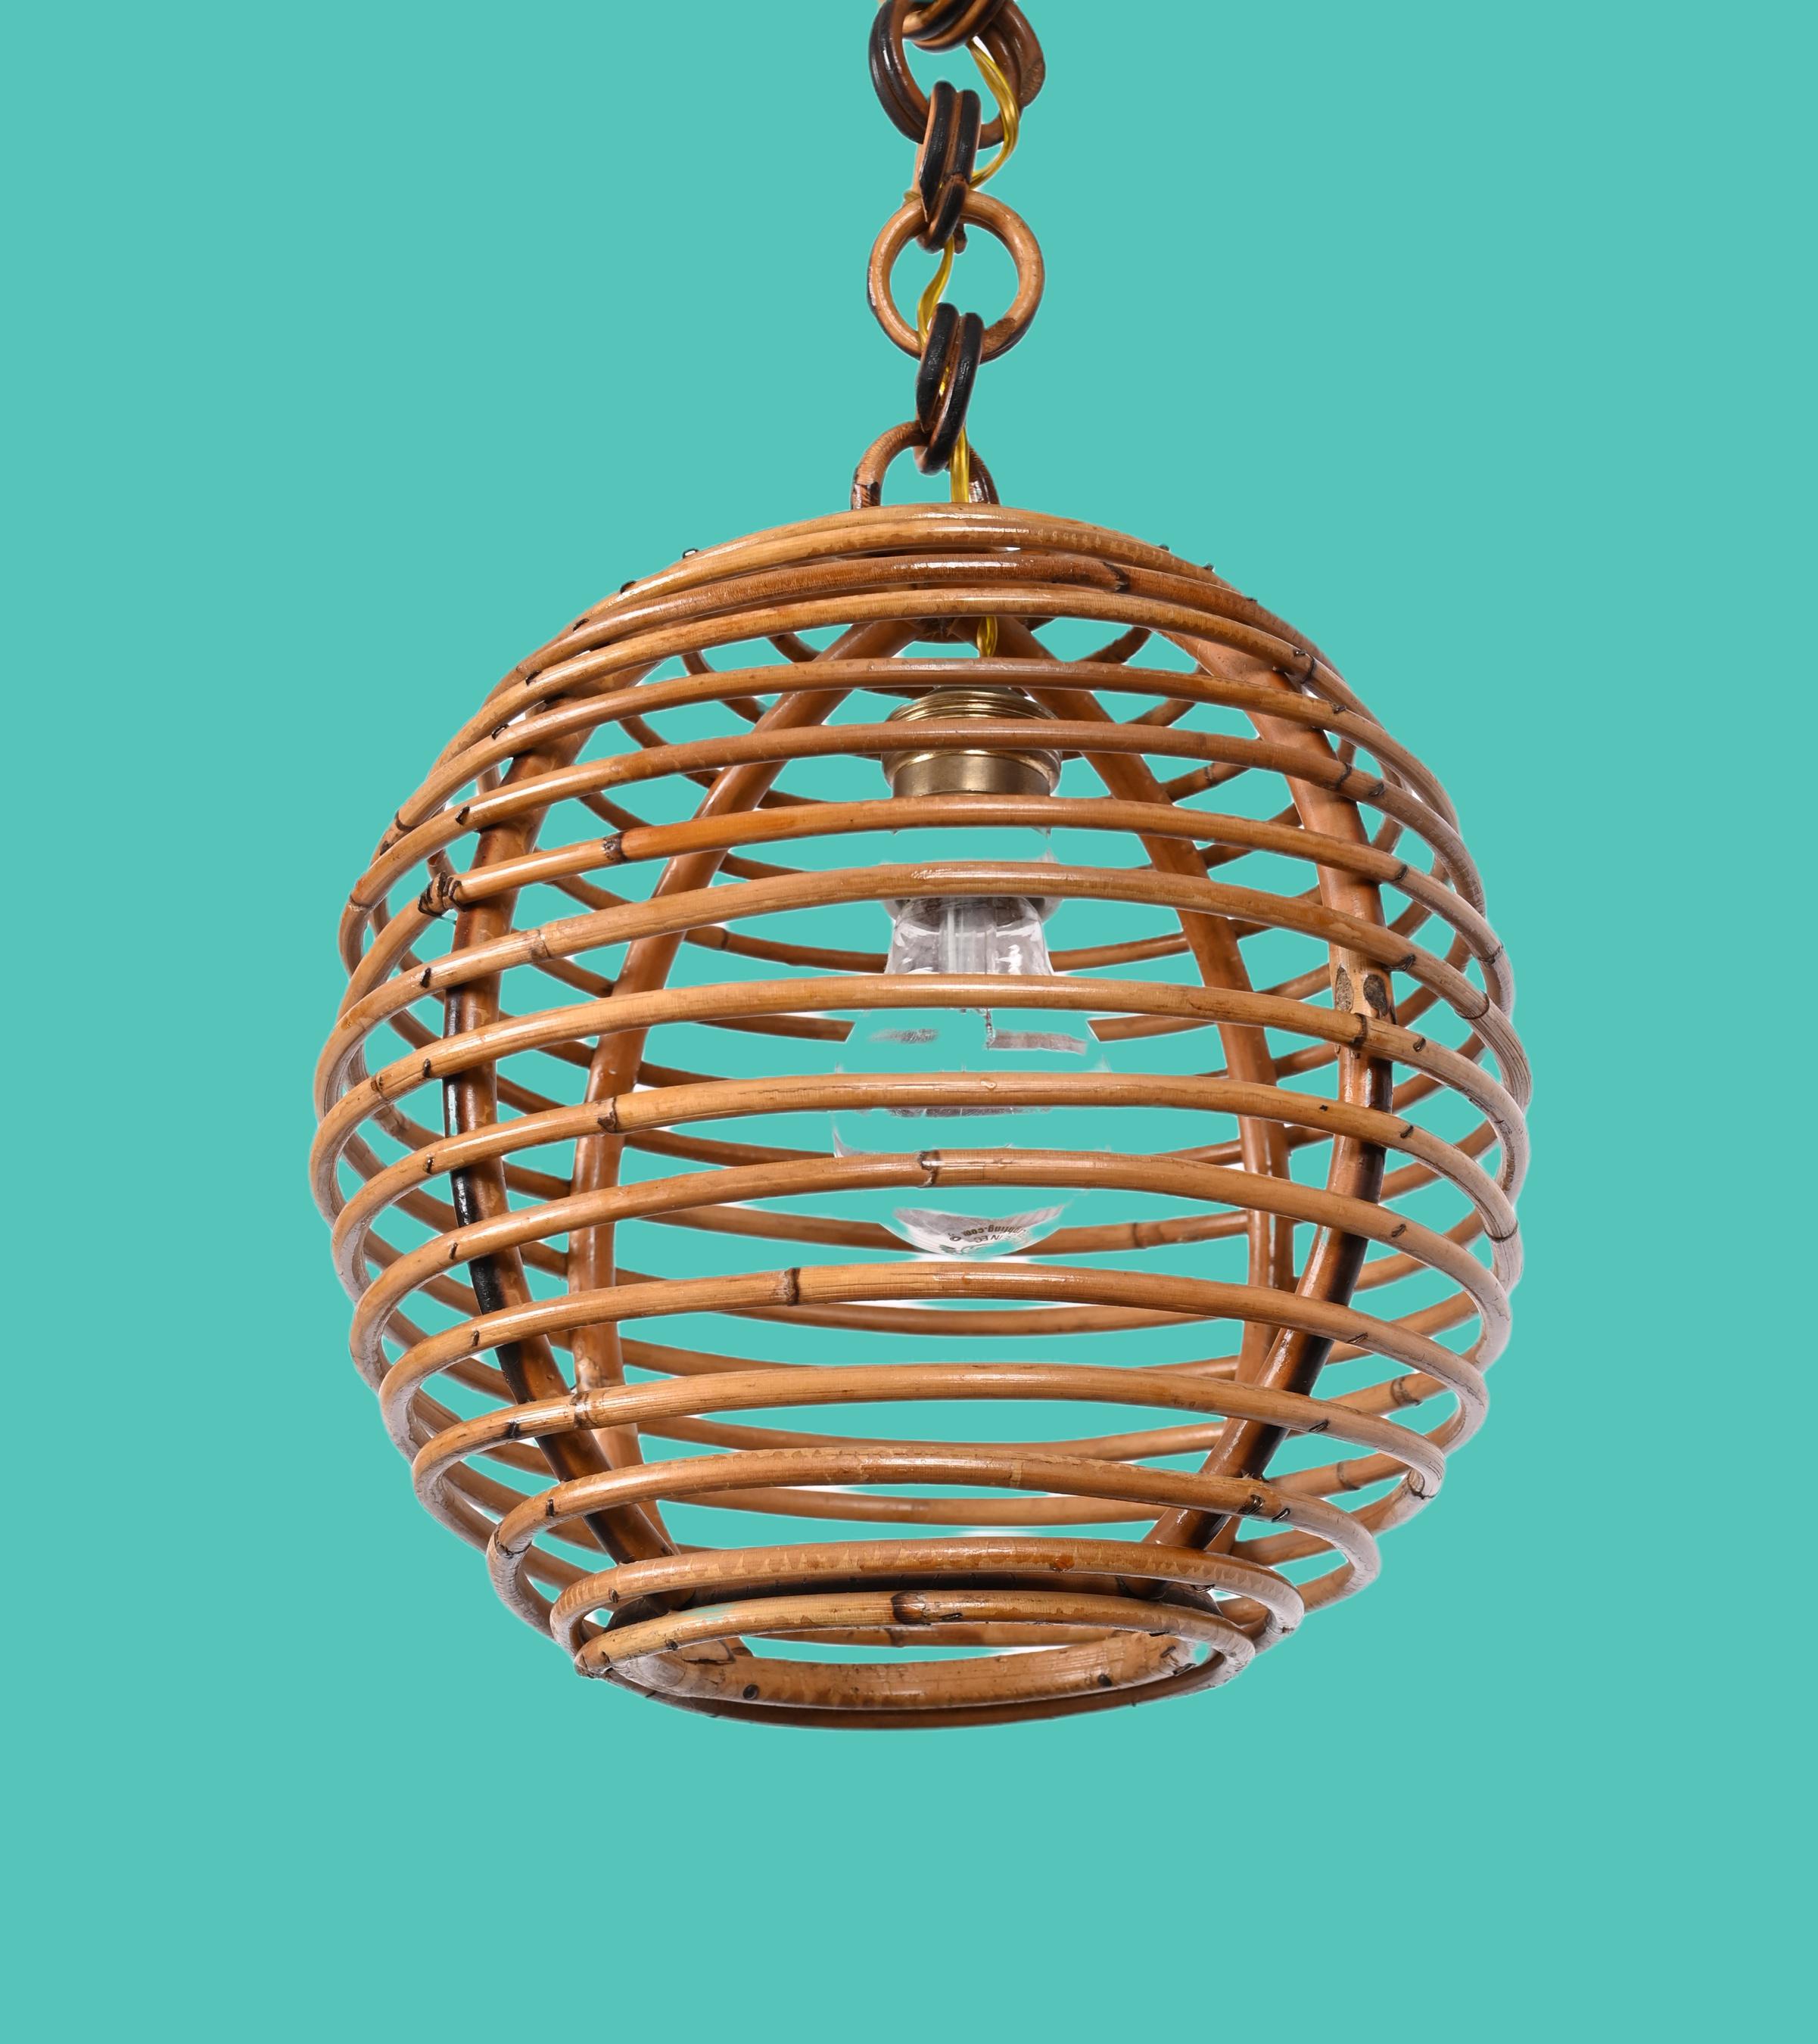 Midcentury French Riviera Bambo and Rattan Spherical Italian Chandelier, 1960s For Sale 4